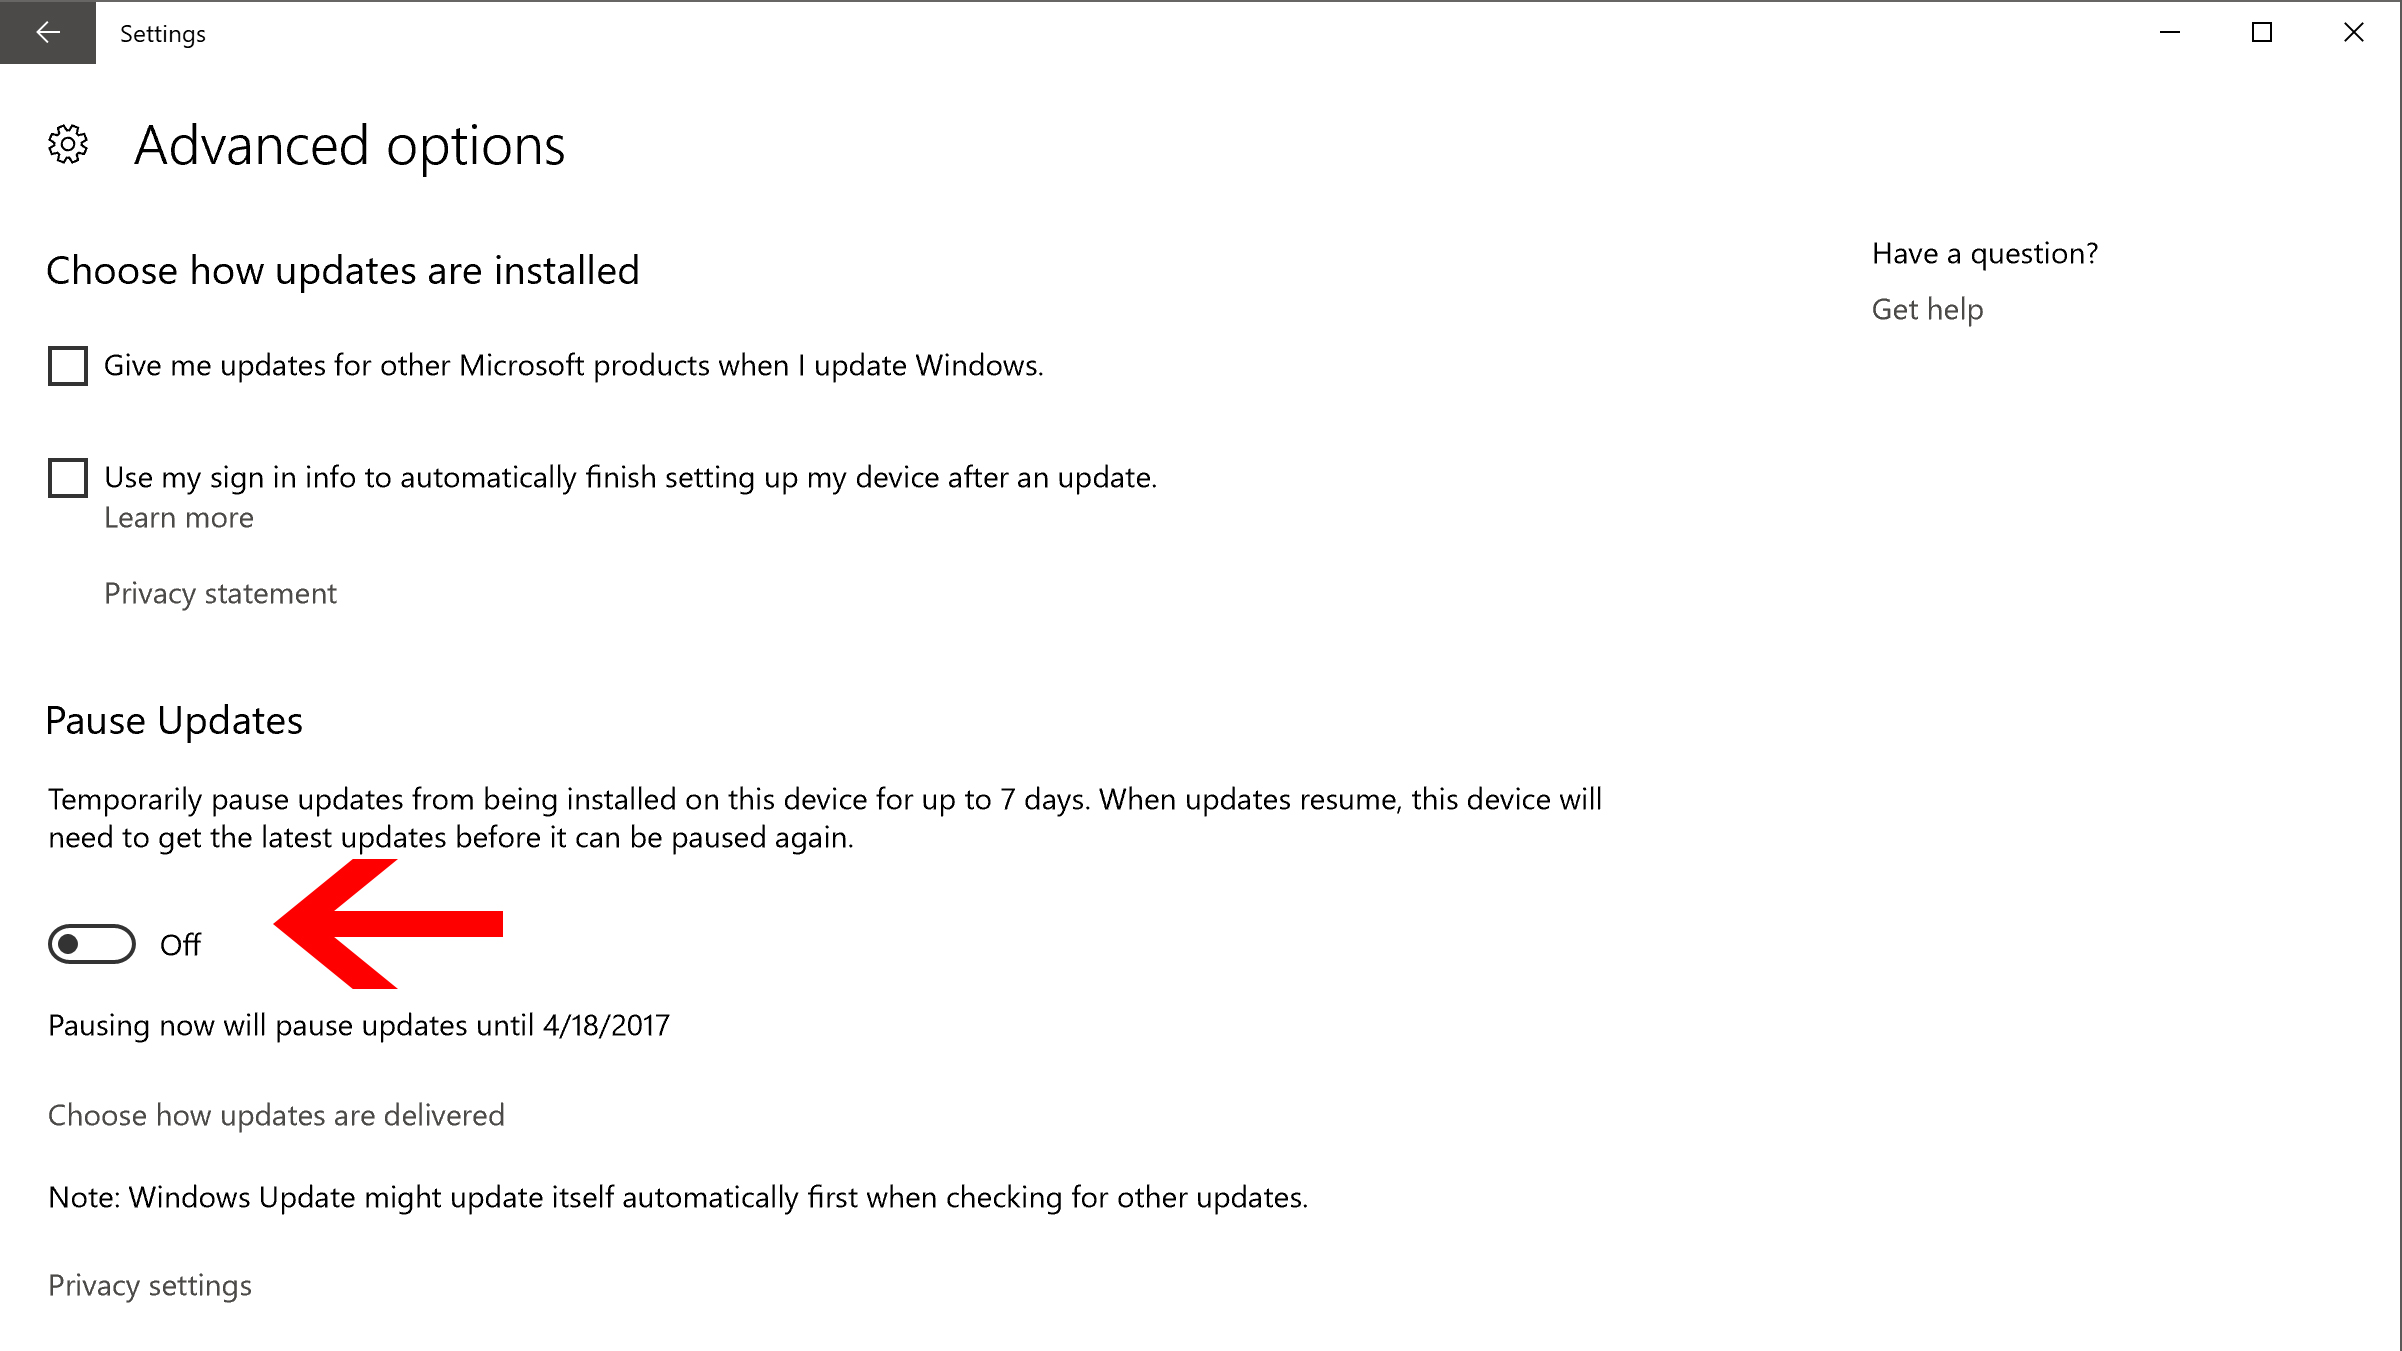 The Latest Windows Update Finally Lets You Put Off Future Updates